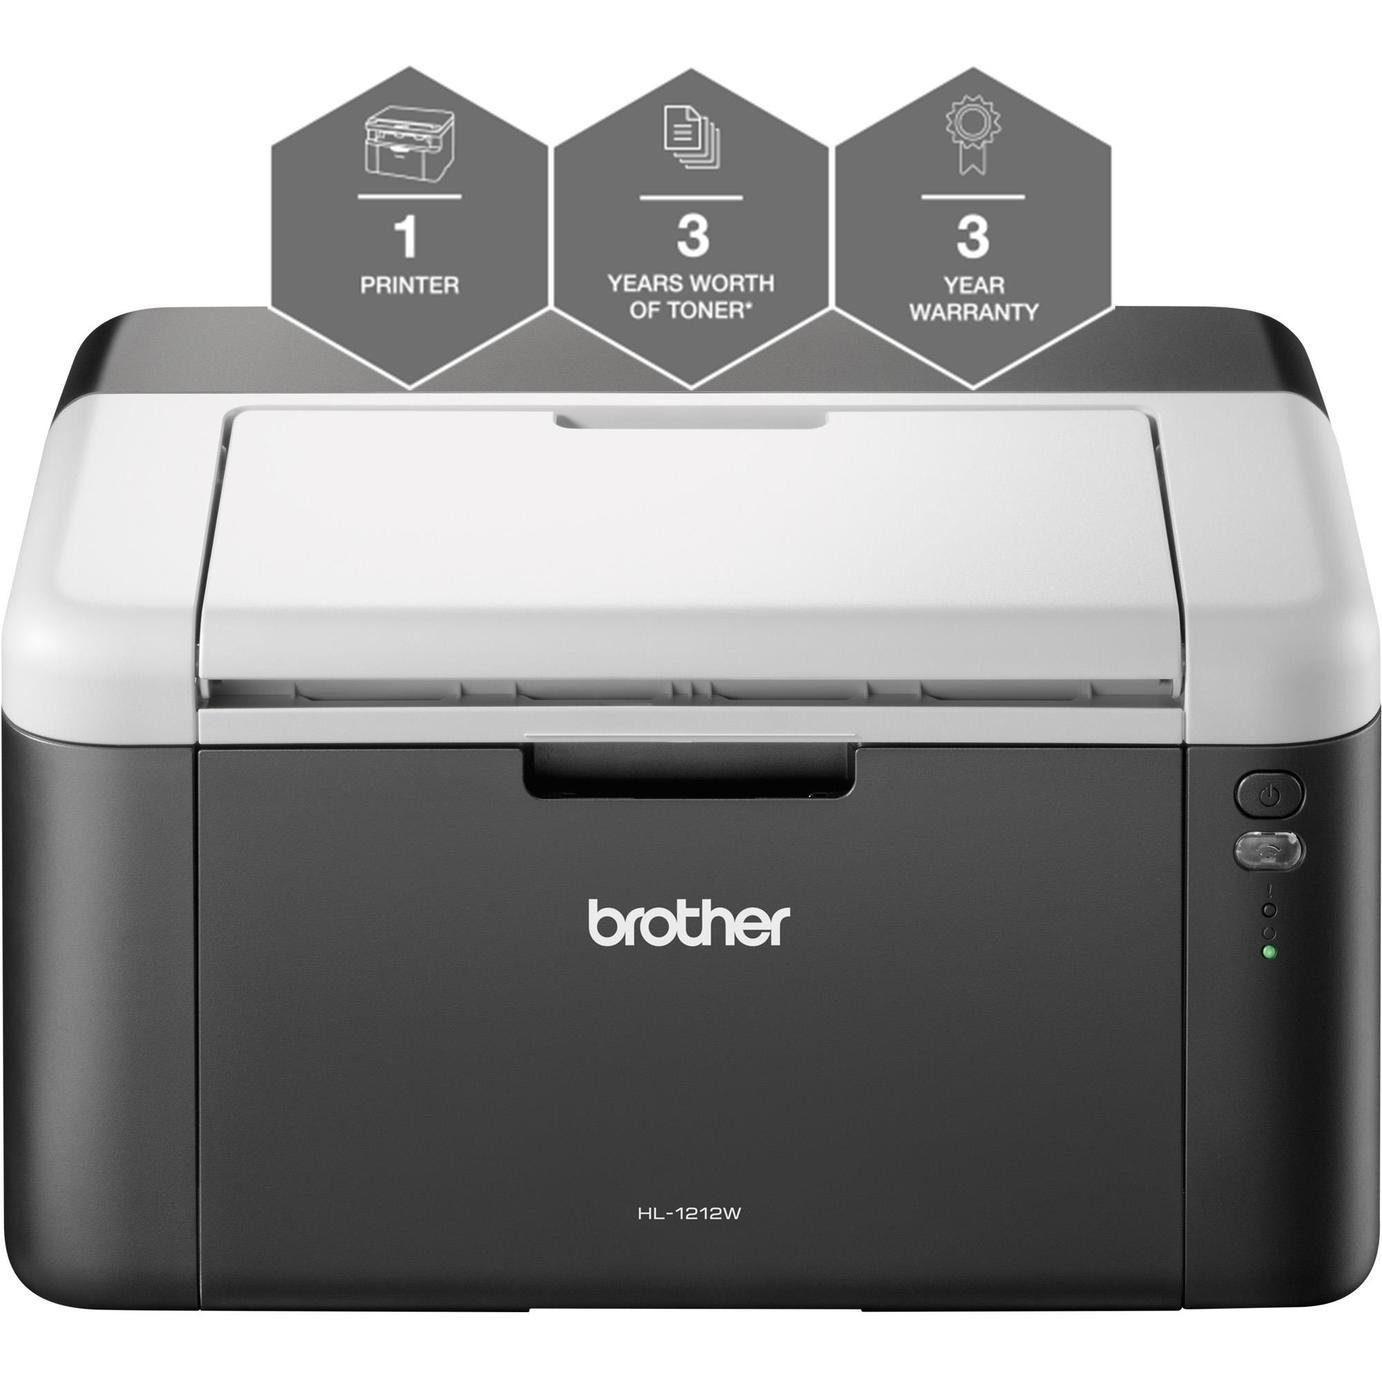 Brother HL-1212W All-in-Box Laser Printer